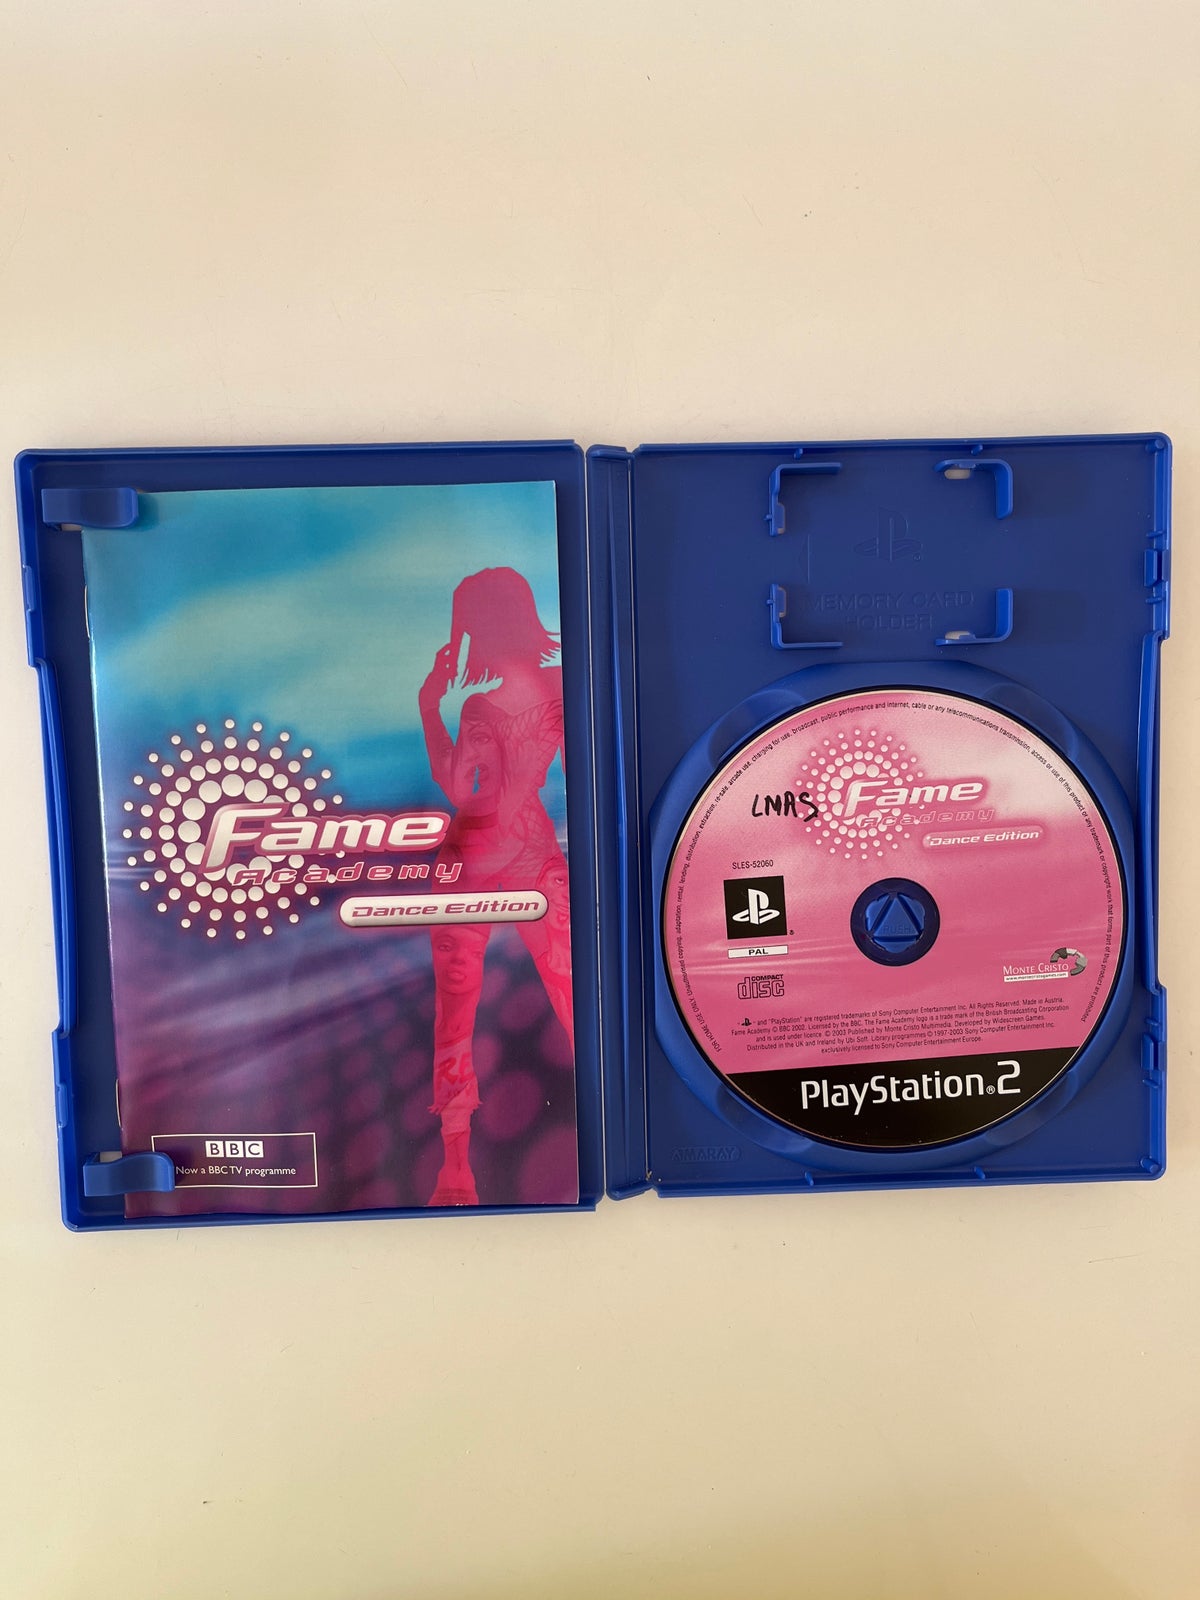 Fame Academy Dance Edition, PS2, anden genre